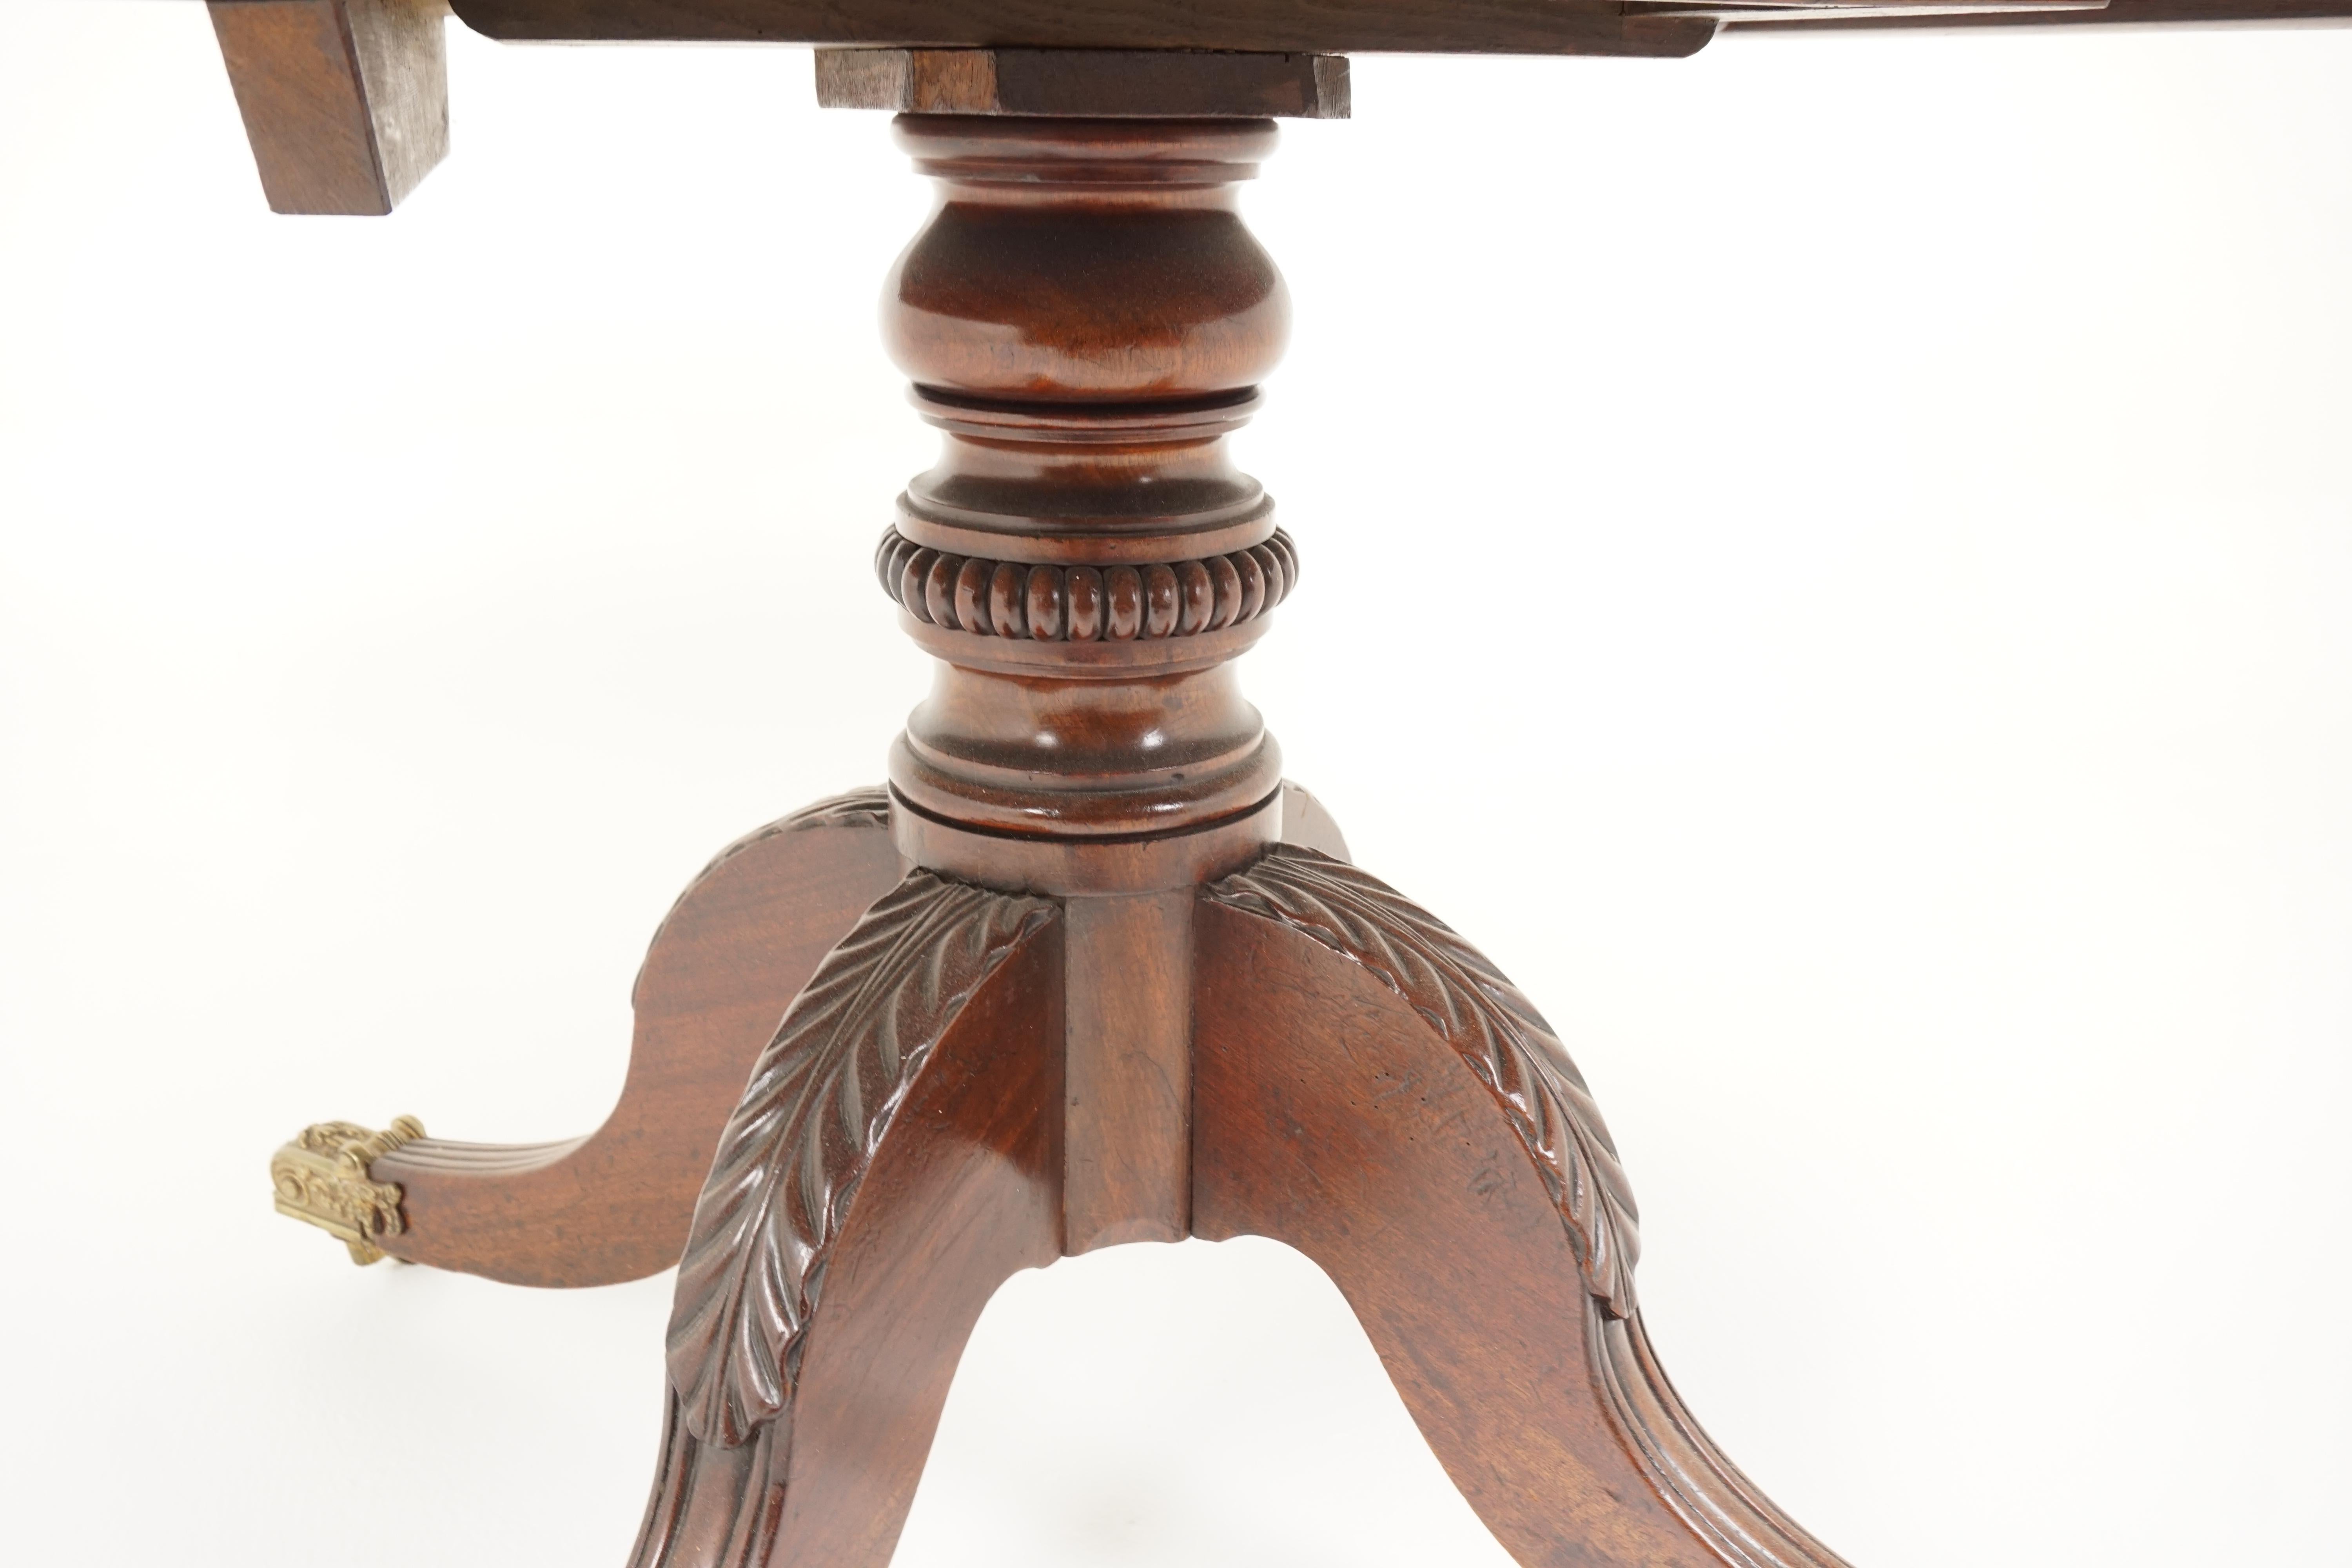 Victorian dining table, walnut, tilt top, breakfast table, Scotland 1840, H289

Scotland 1840
Solid walnut
Original finish
Rectangular top
Standing on a ring turned pedestal column
With four carved shaped splayed legs
With foliate castor